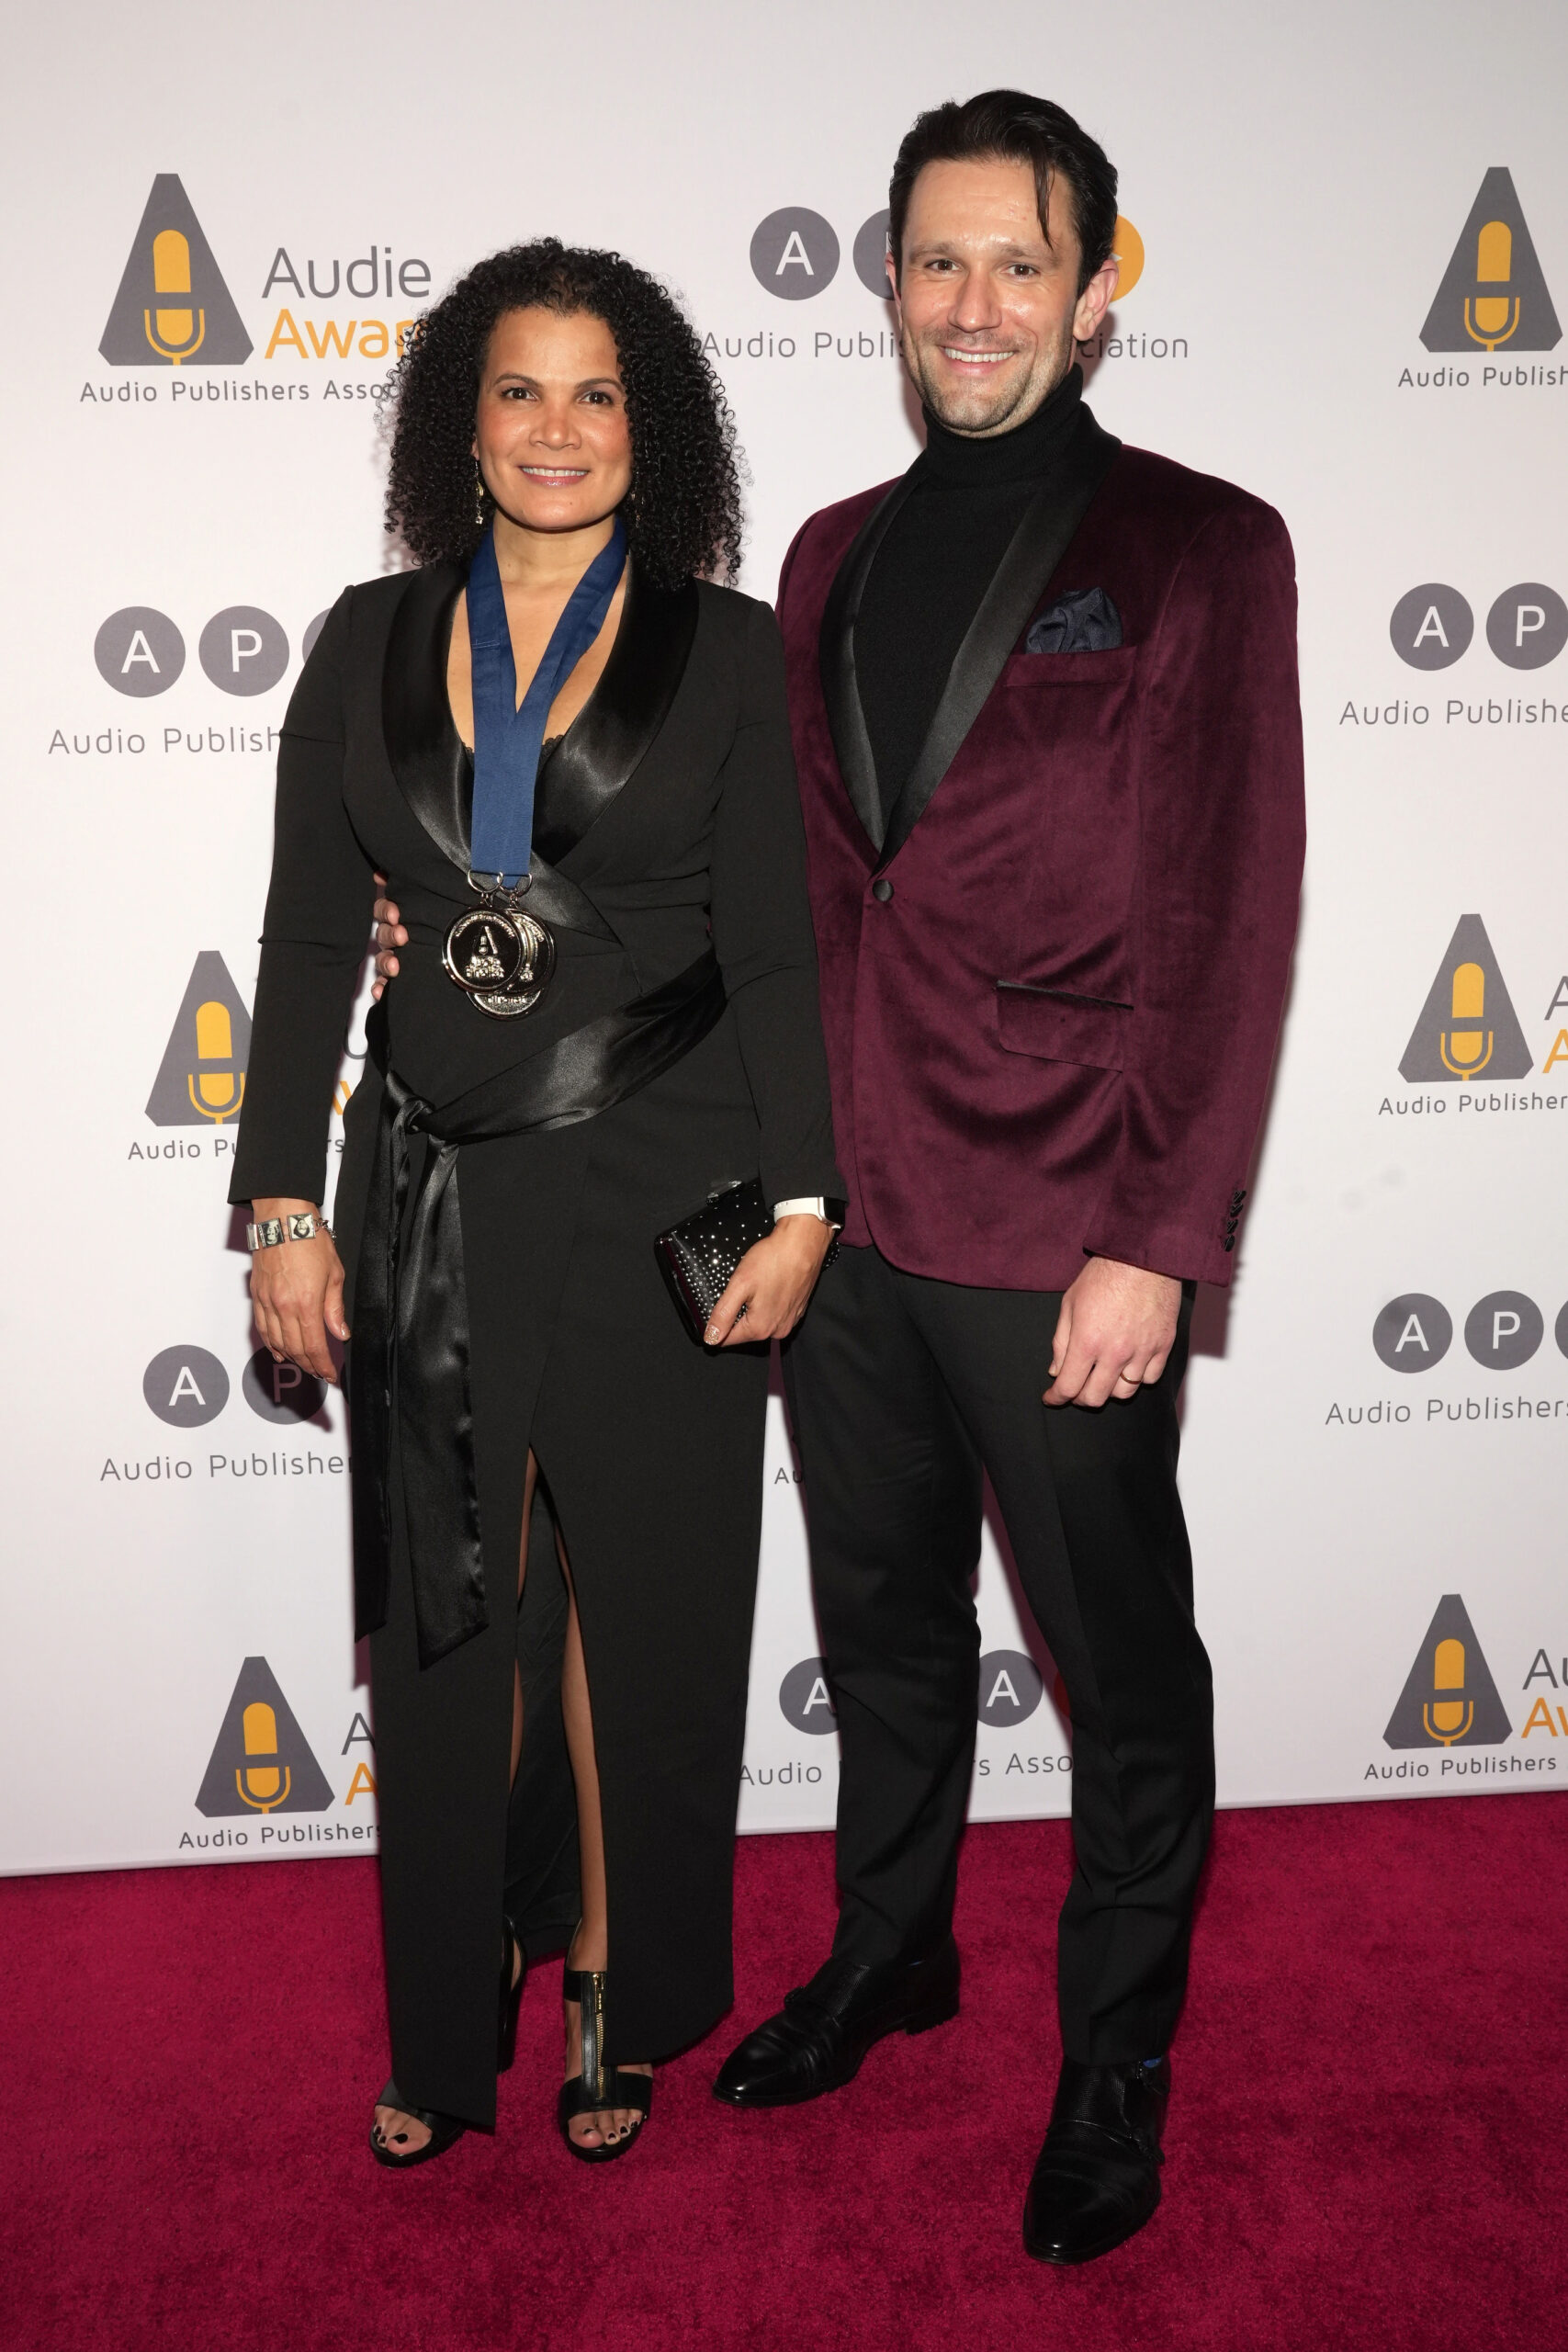 With my wife, January LaVoy, at the 2023 Audie Awards in New York